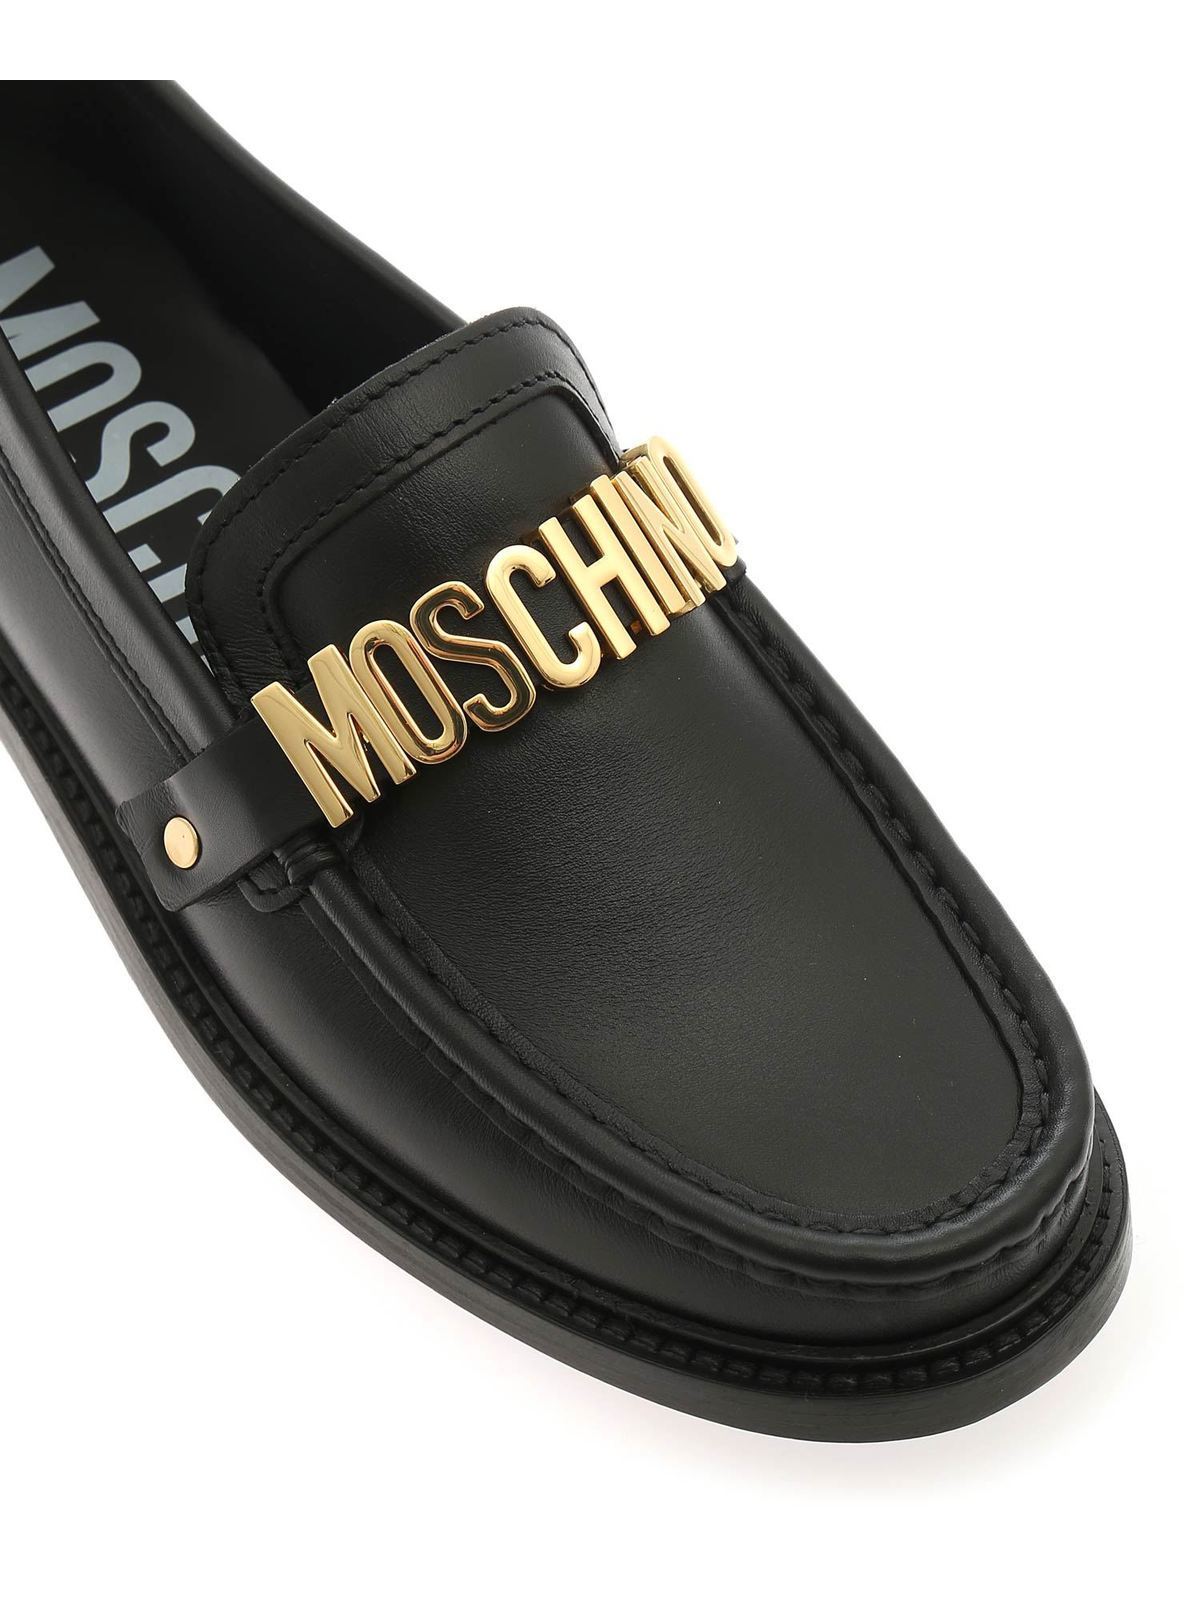 Behalf walk Rainy Loafers & Slippers Moschino - Lettering loafers in black - MA10362C1DMF0000